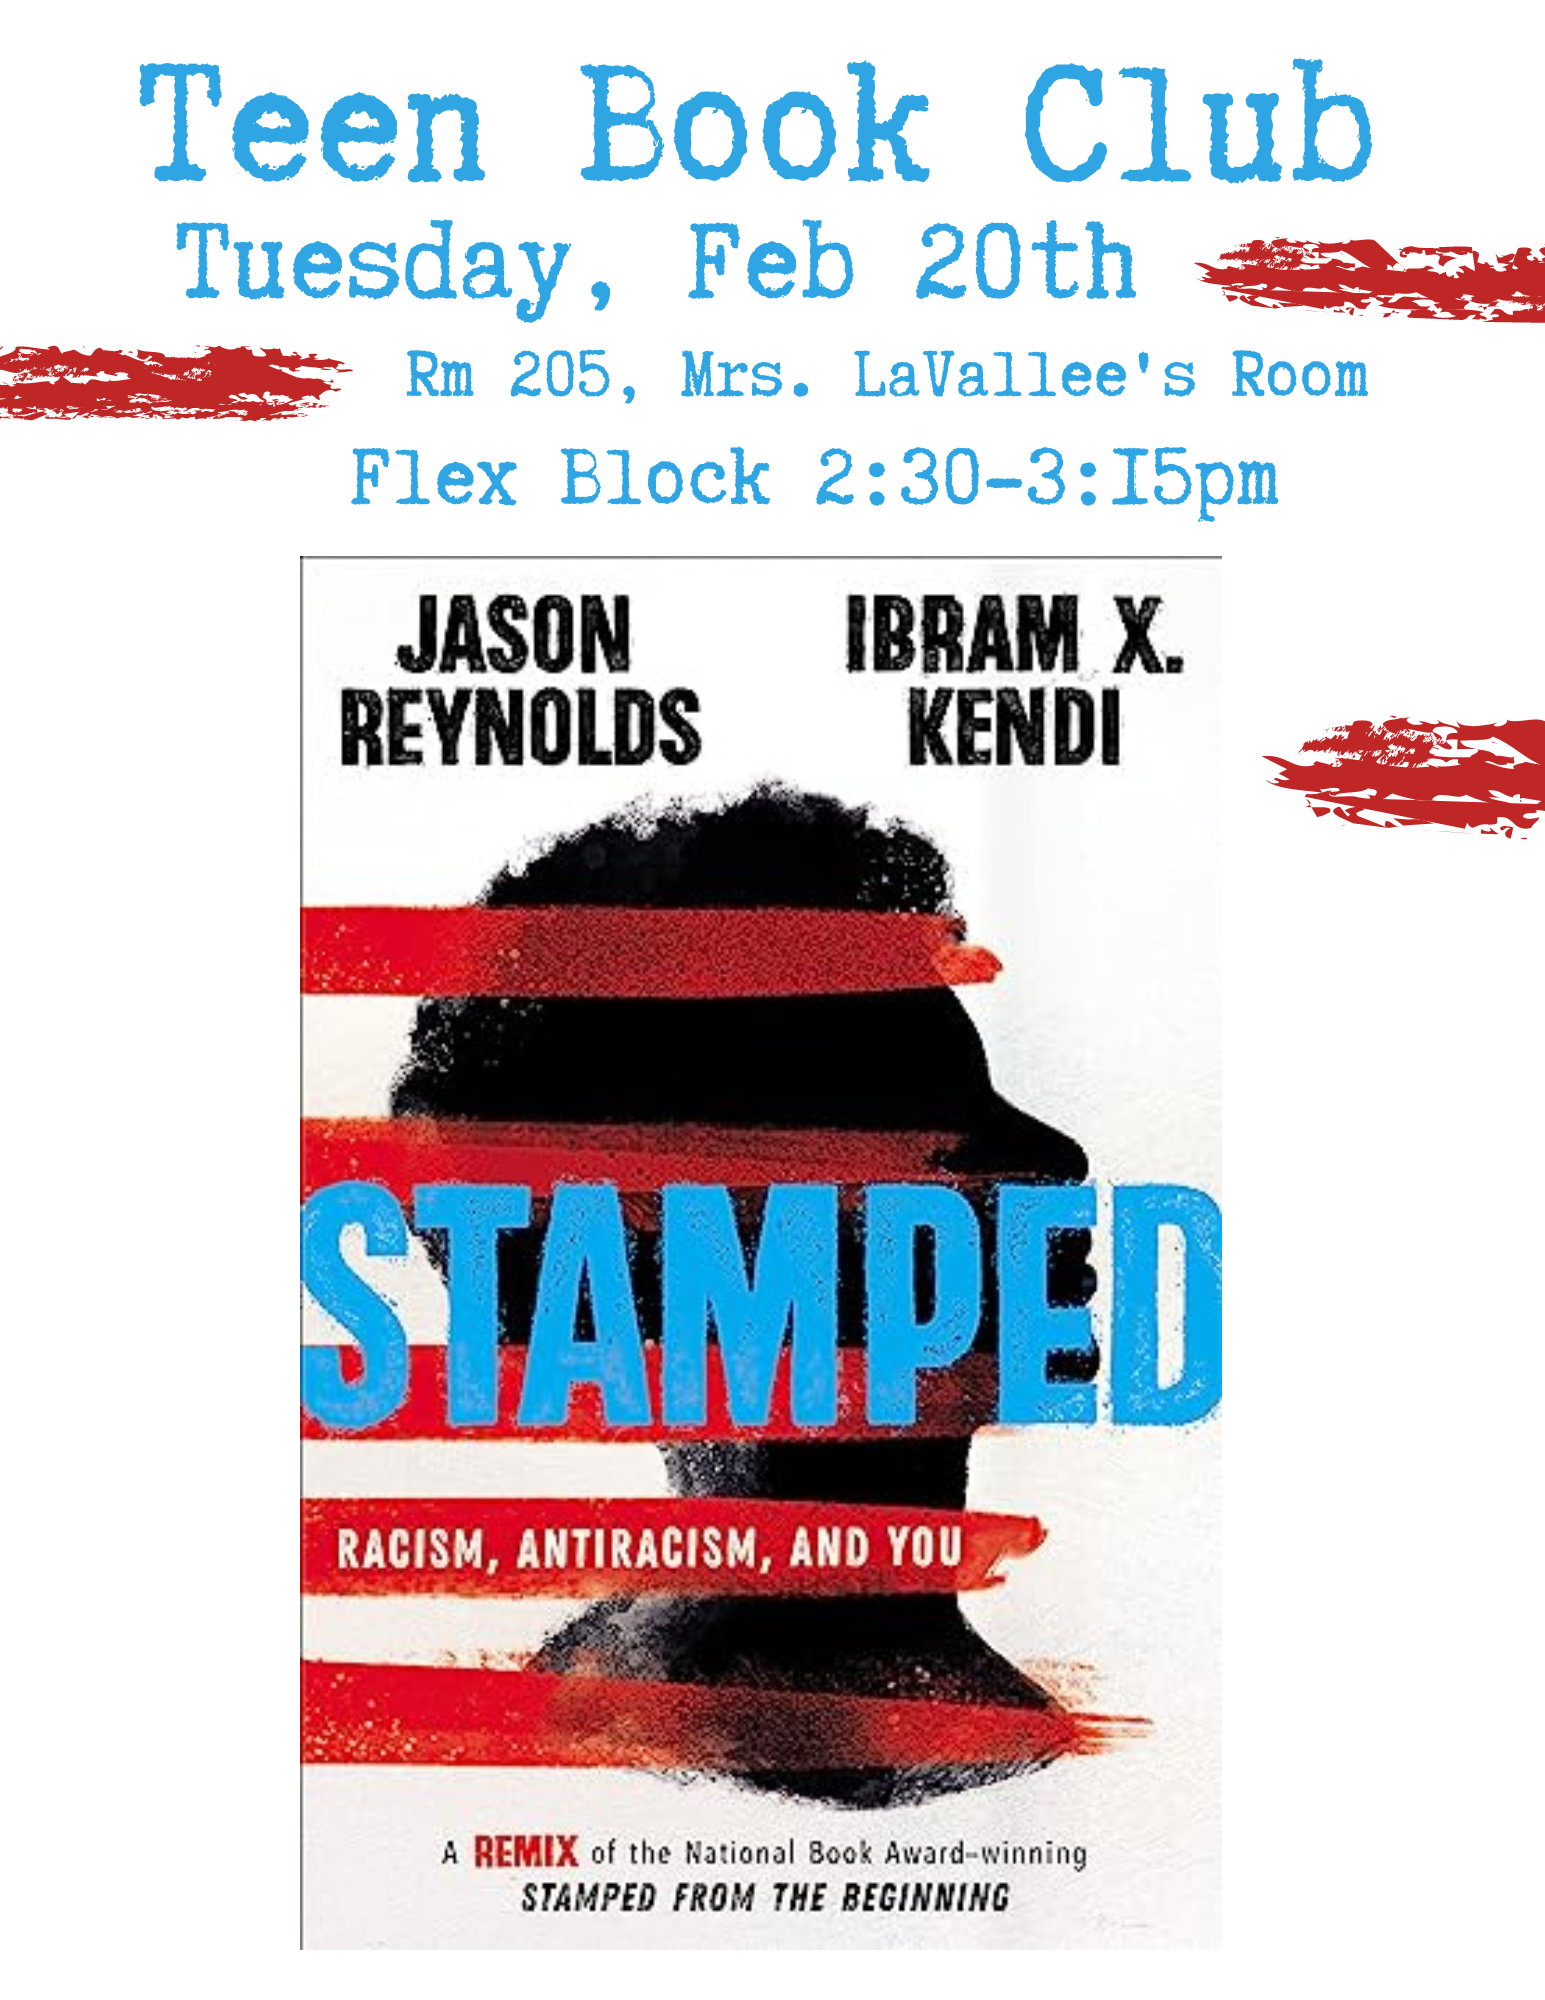 An image of the book cover for Stamped, the Y.A. edition, and the location/time of book club which is listed in description.